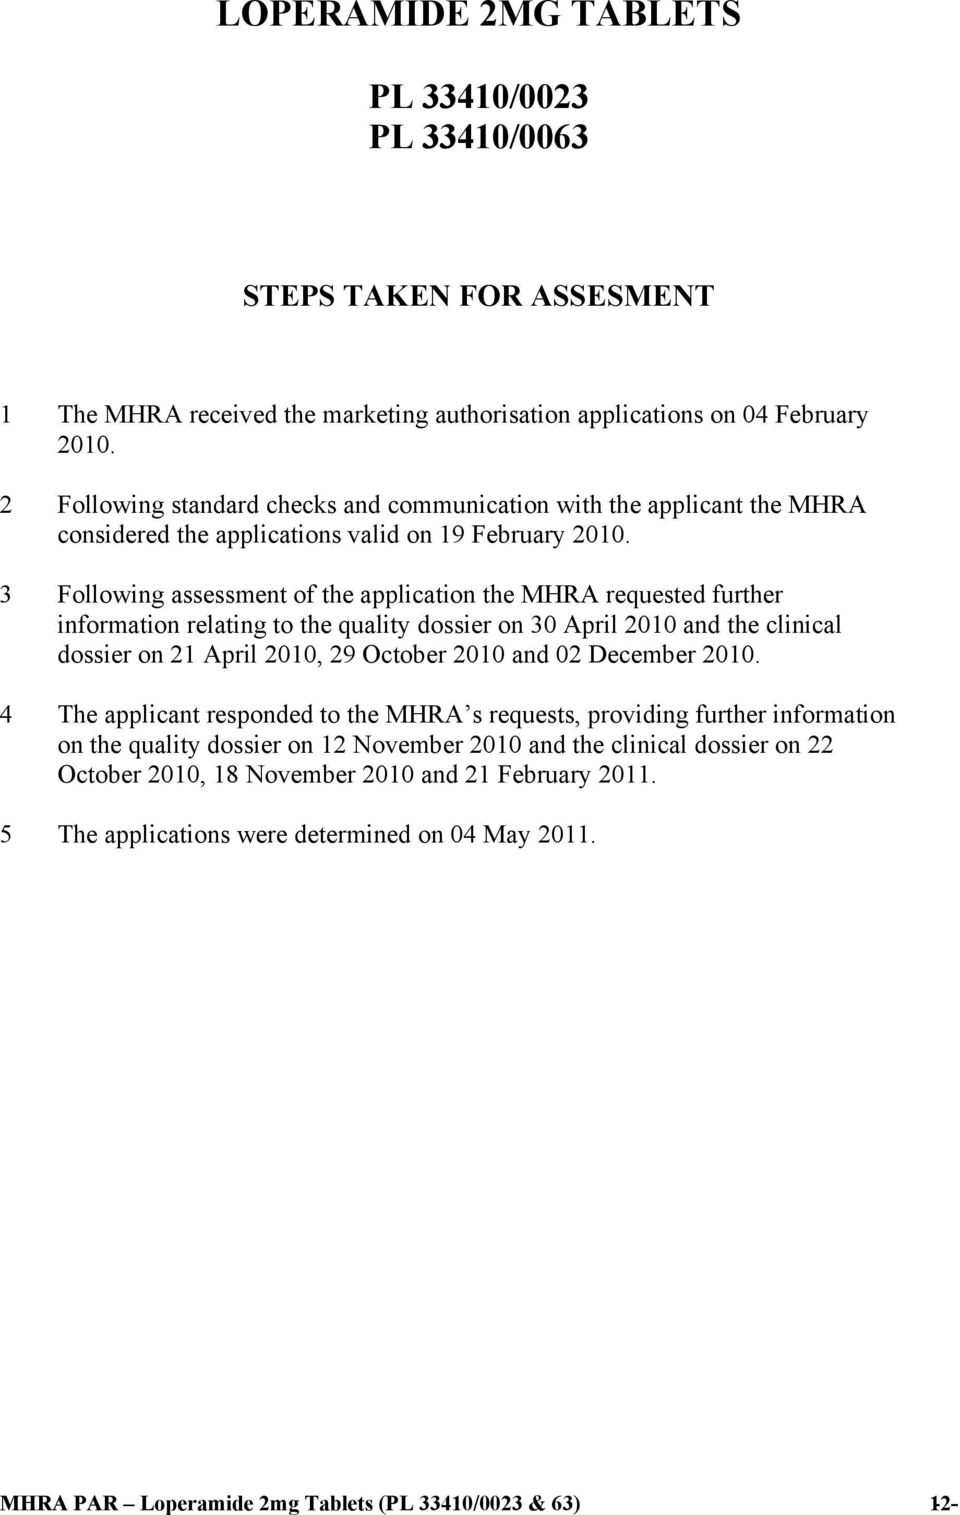 3 Following assessment of the application the MHRA requested further information relating to the quality dossier on 30 April 2010 and the clinical dossier on 21 April 2010, 29 October 2010 and 02